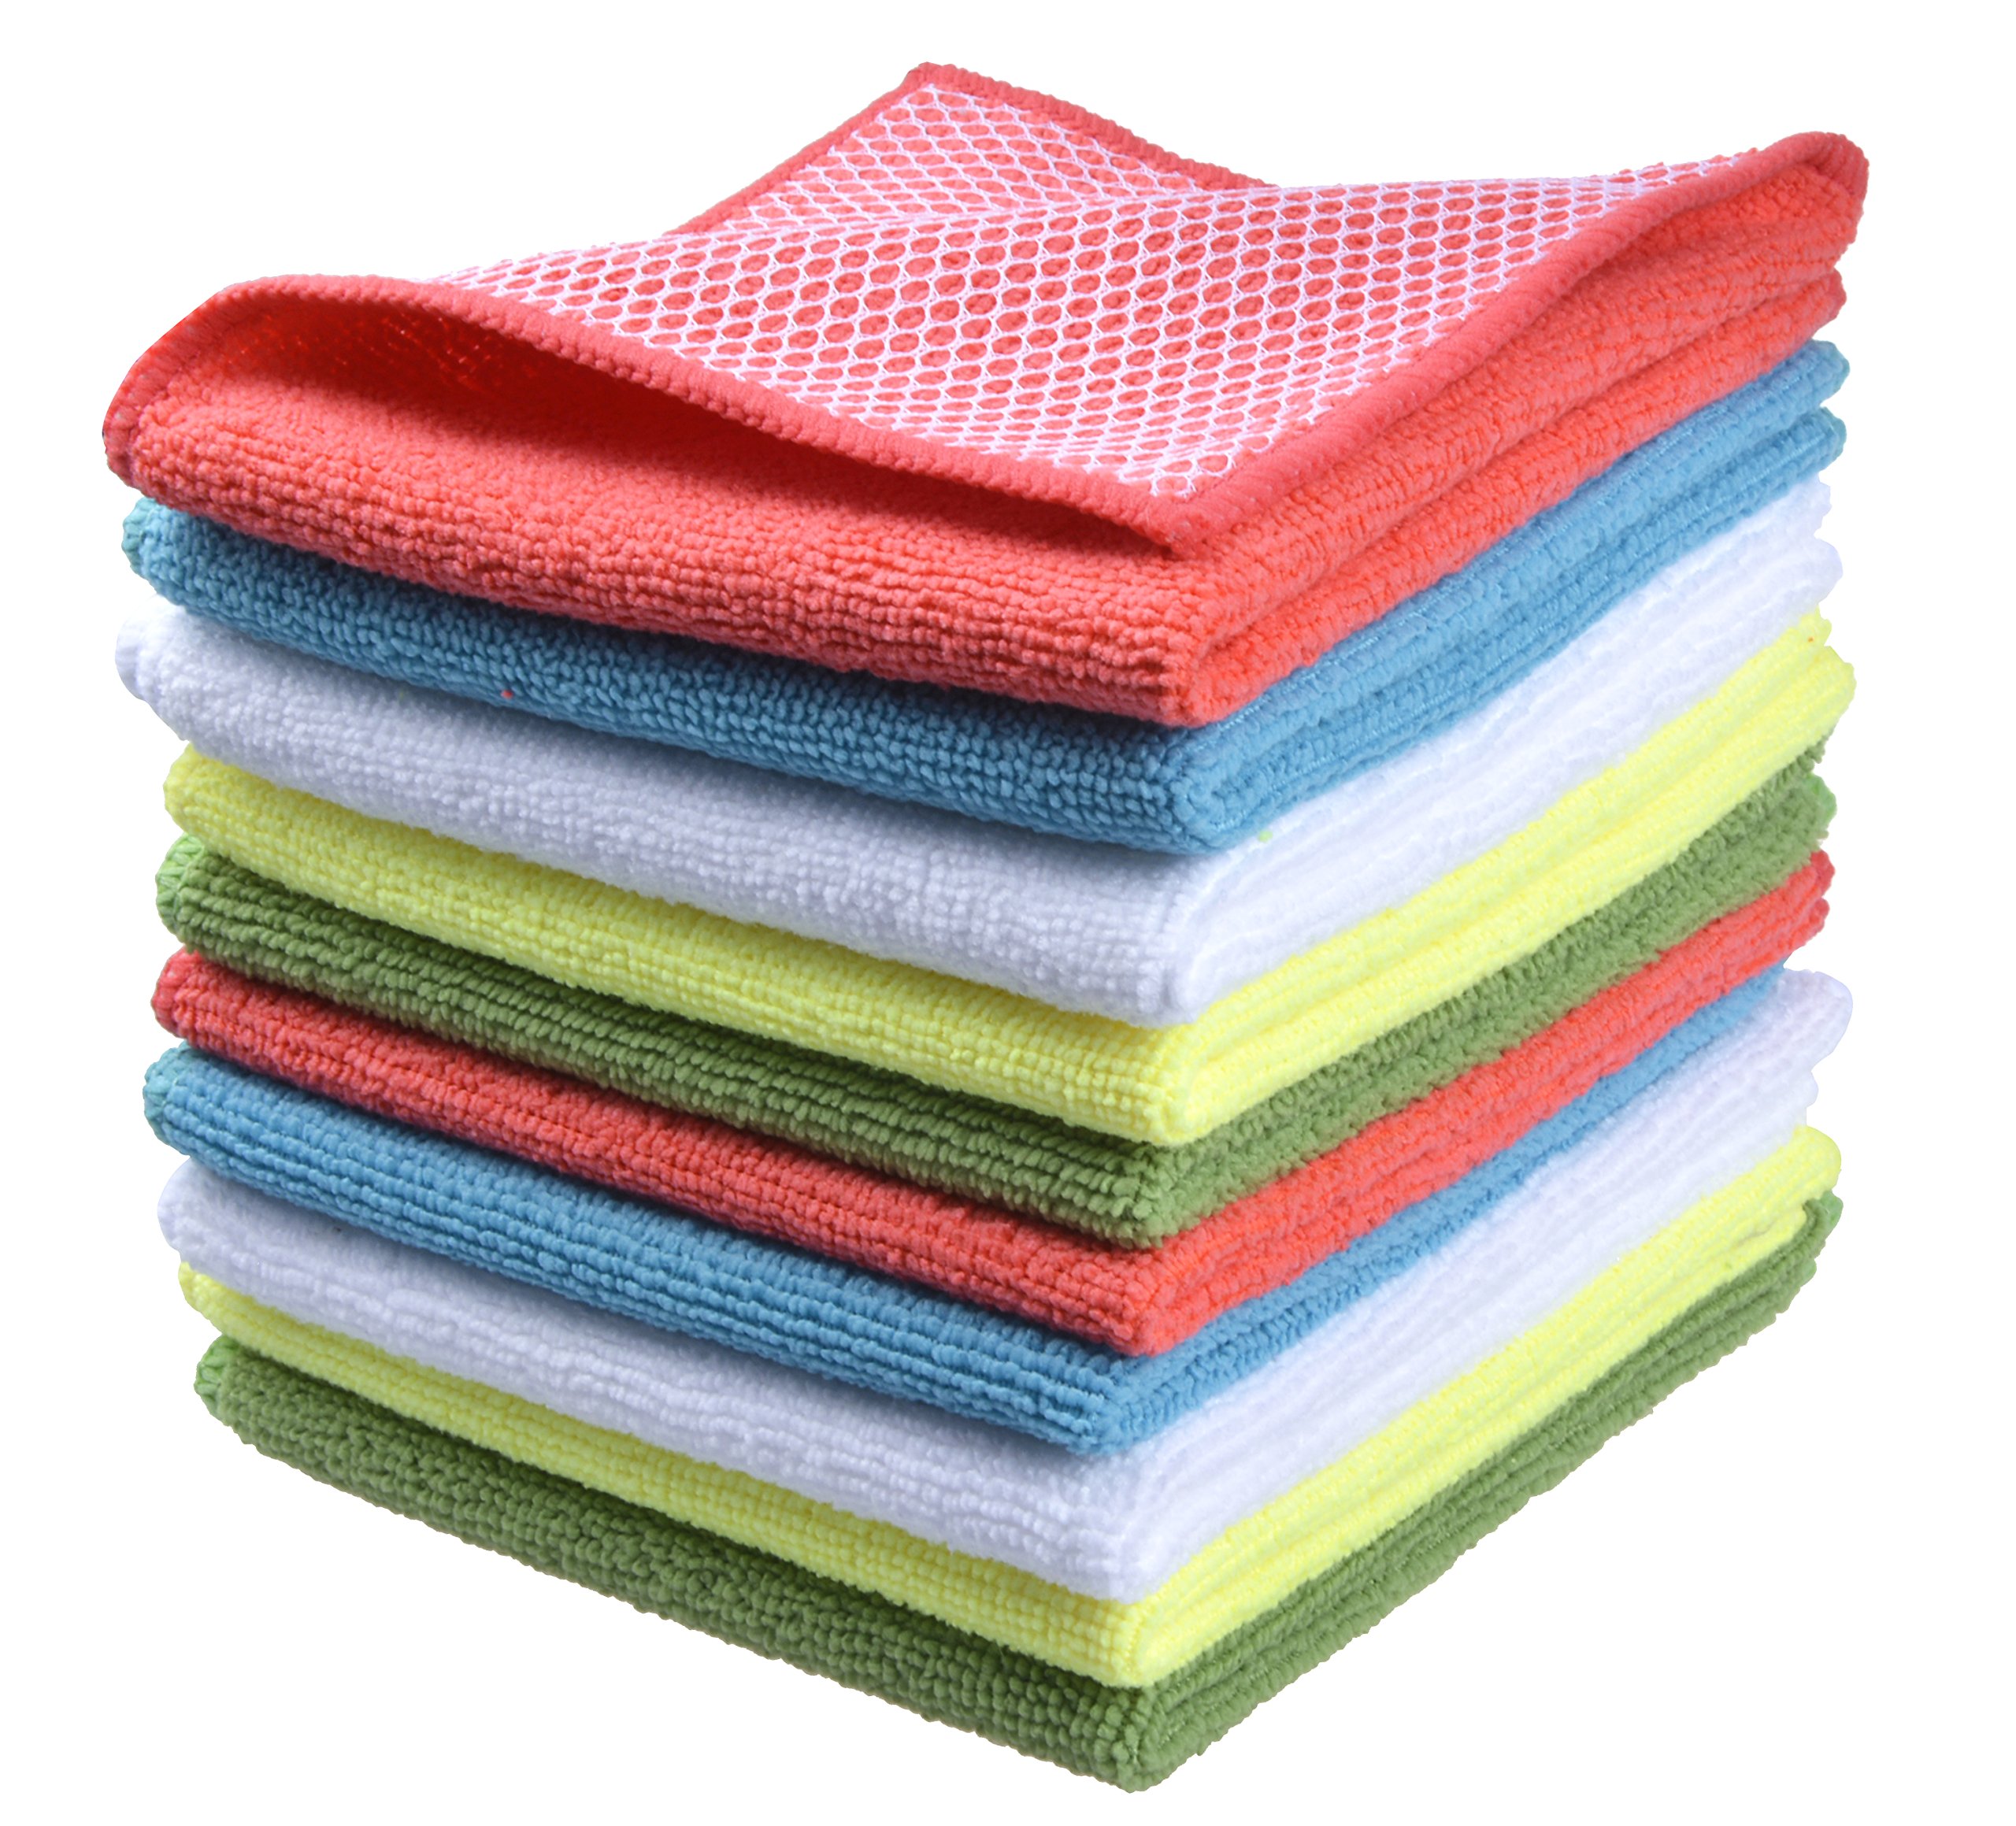 Dish Cloths For Washing Dishes - 10 X 10 Kitchen Dish Cloths, Pack of 5 Dish  Towels For Kitchen, Quick Dry Dish Rags, Super Soft Dish Rags And Dish  Towels, Fast Absorbent